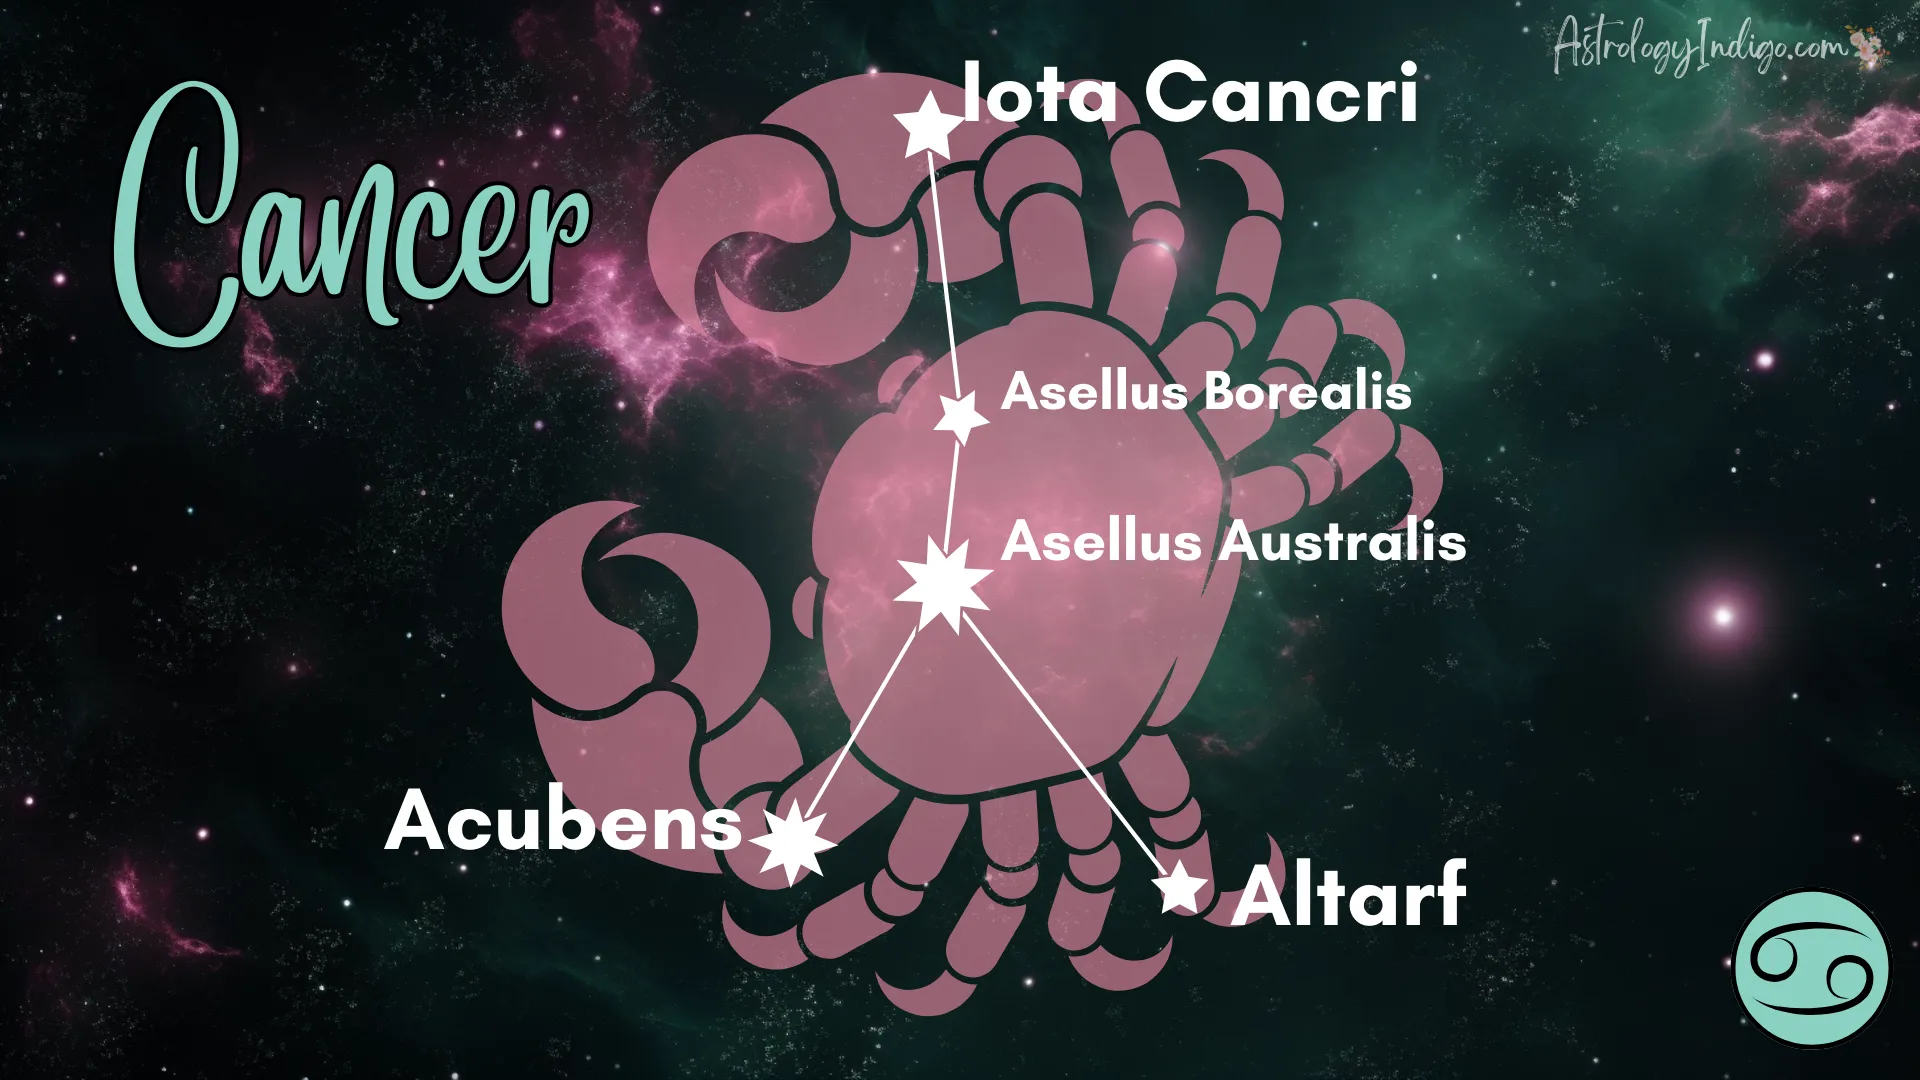 The Cancer constellation with information about the stars and a pink image of a Crab behind it.